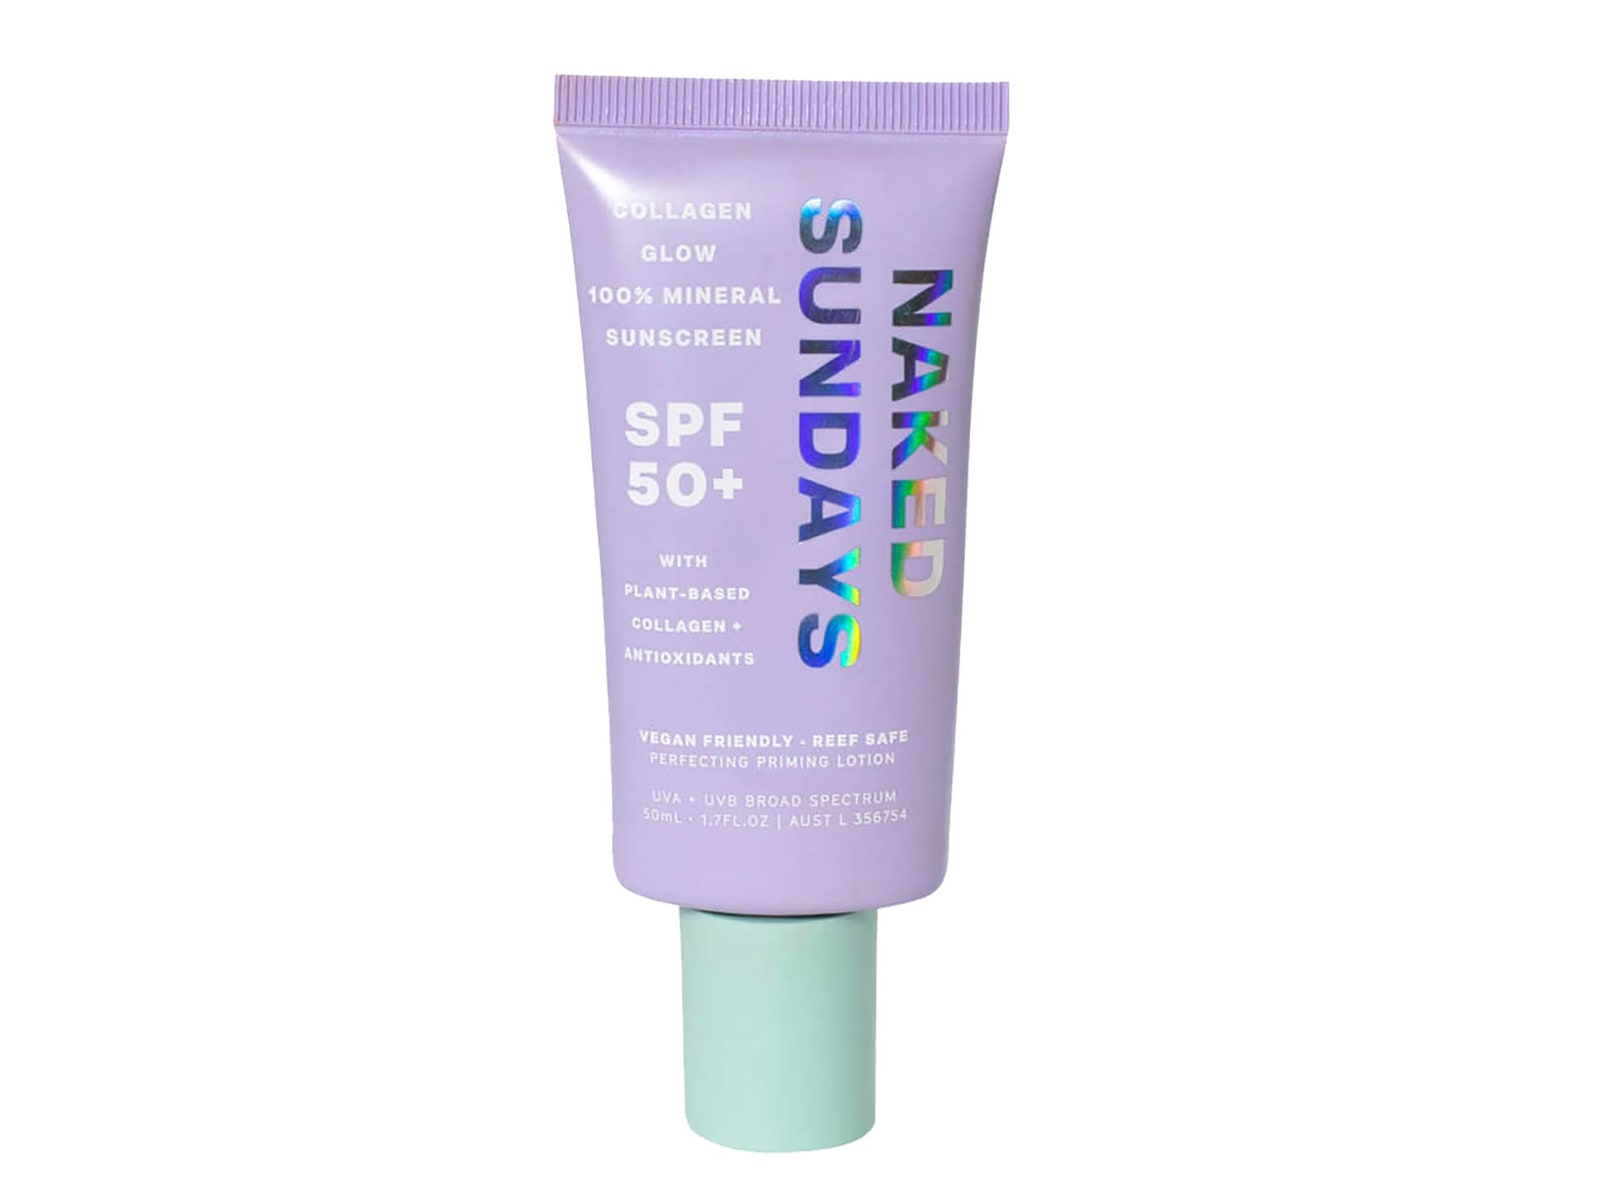 Naked Sundays SPF50+ Collagen Glow 100% Mineral Perfecting Priming Lotion, $42.50